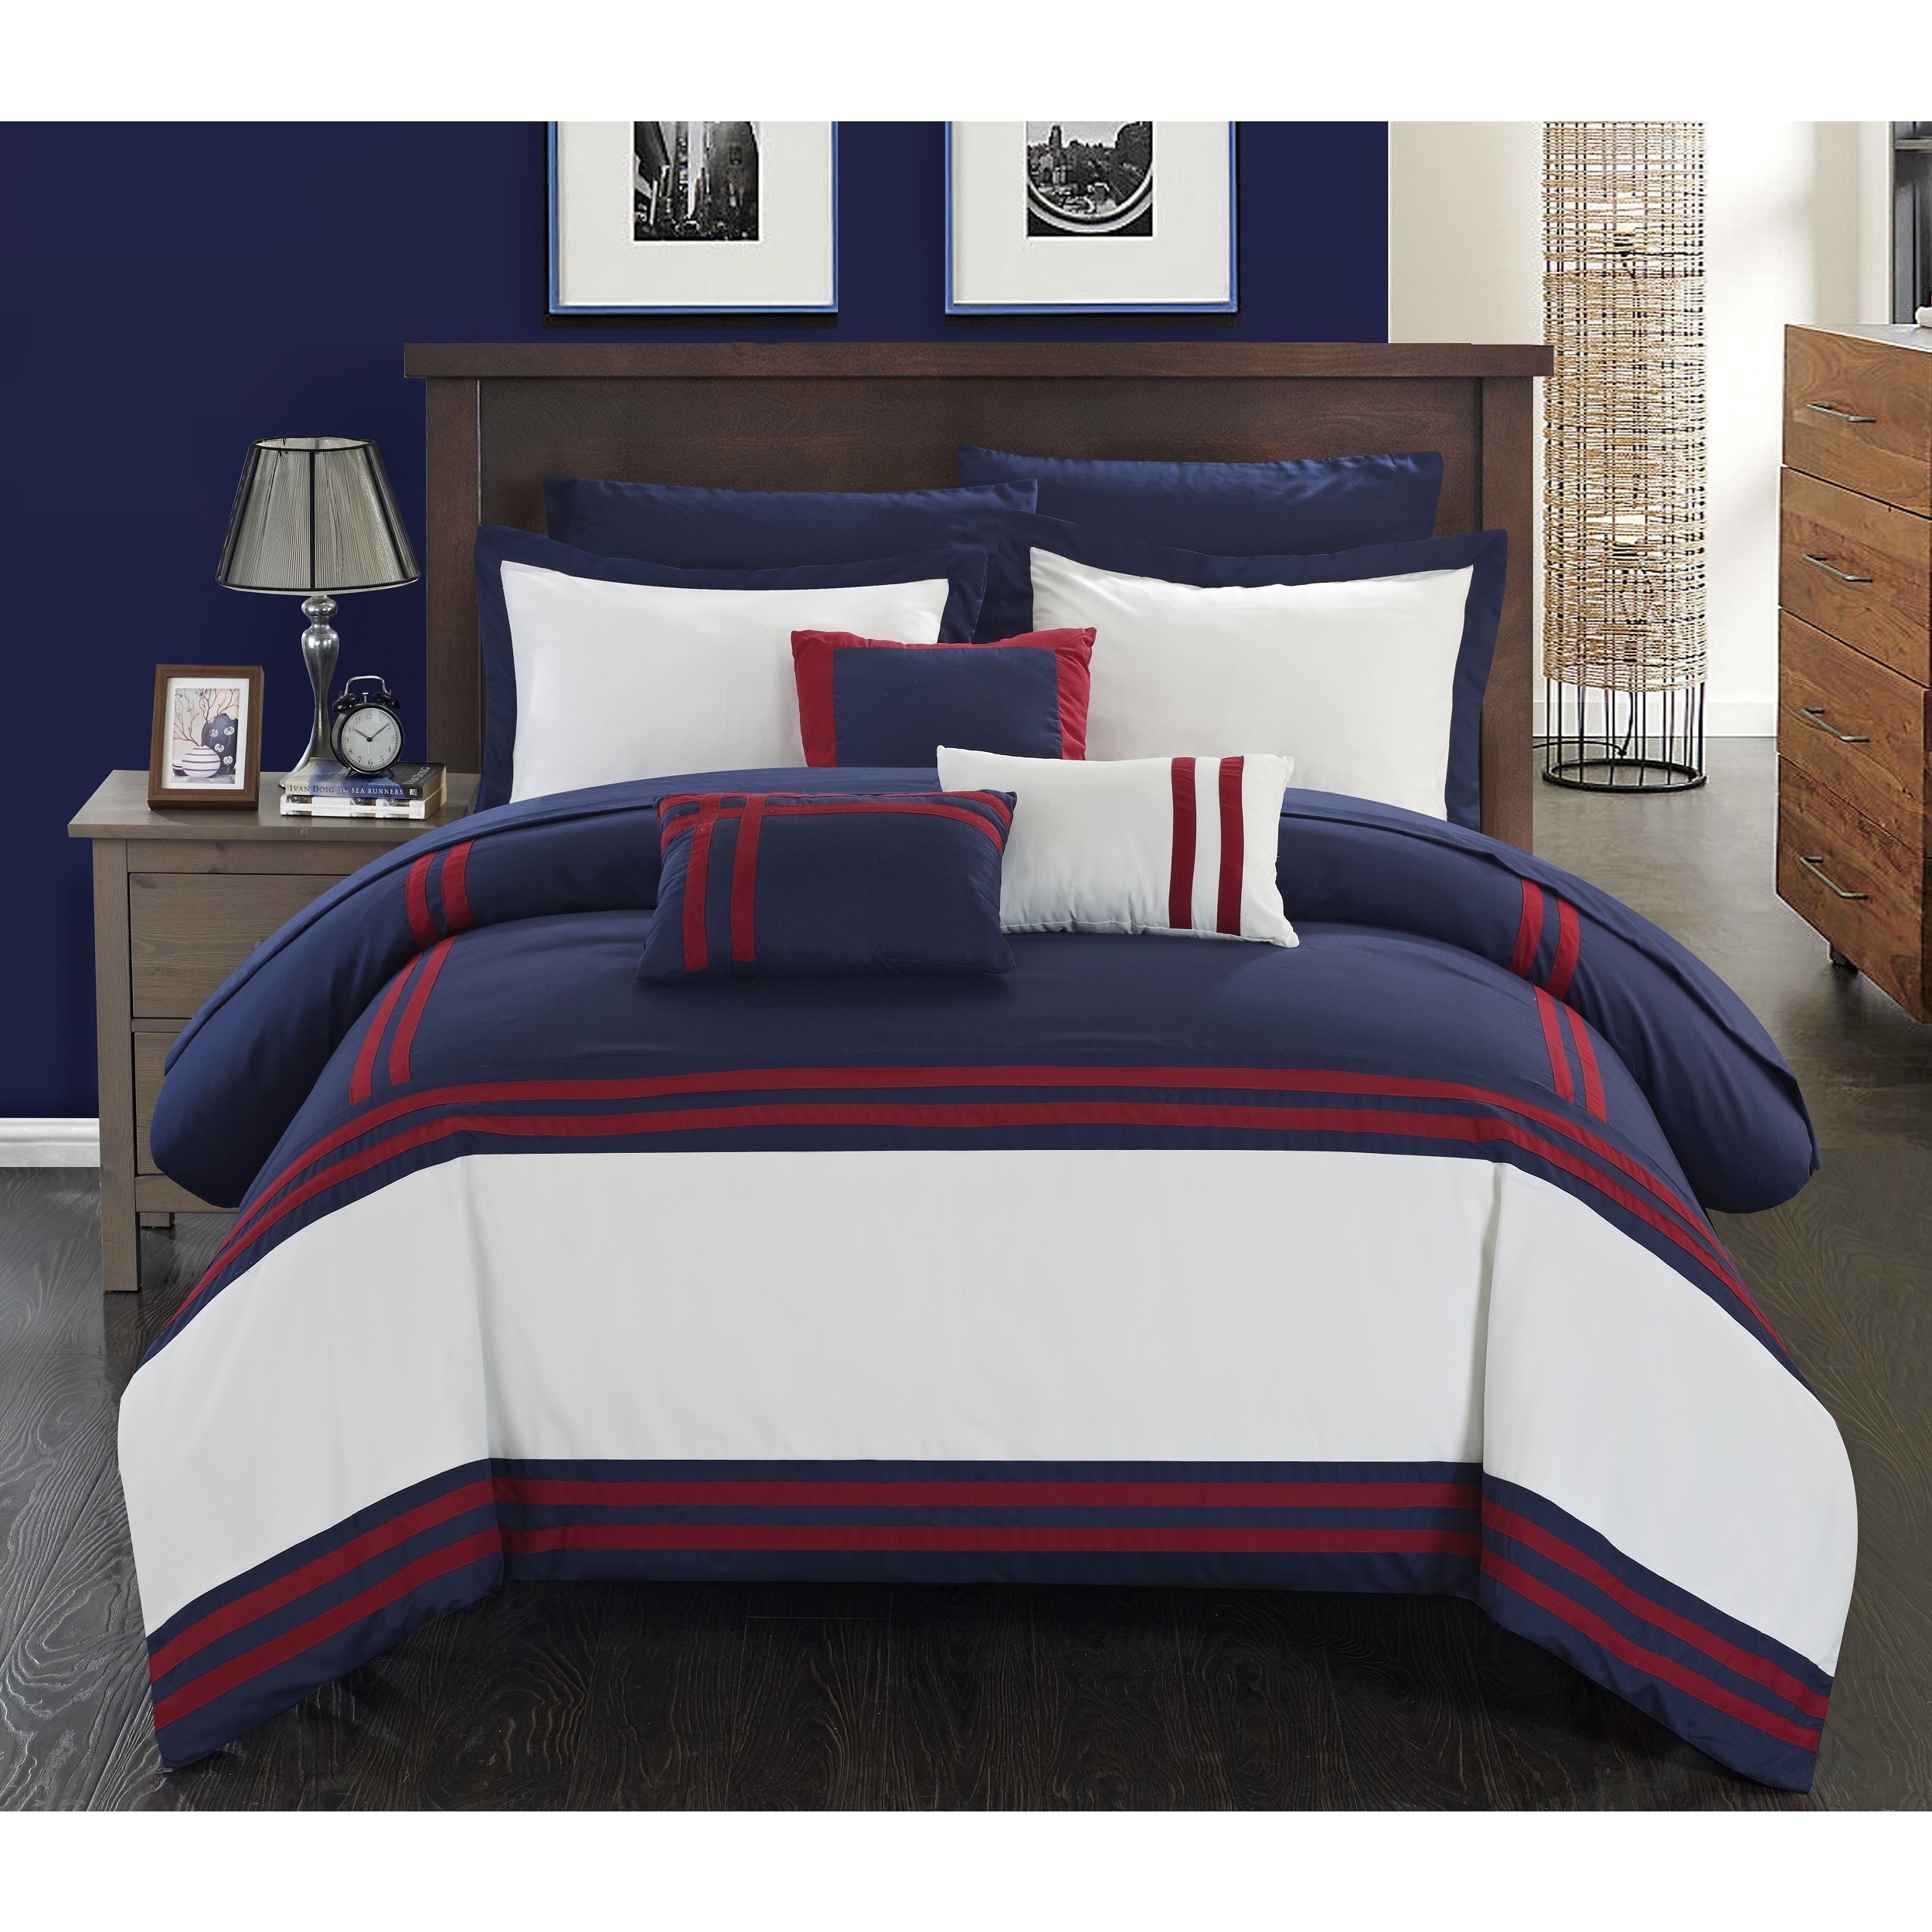 Shop Porch Den Highland Navy And Red Oversized 10 Piece Bed In A